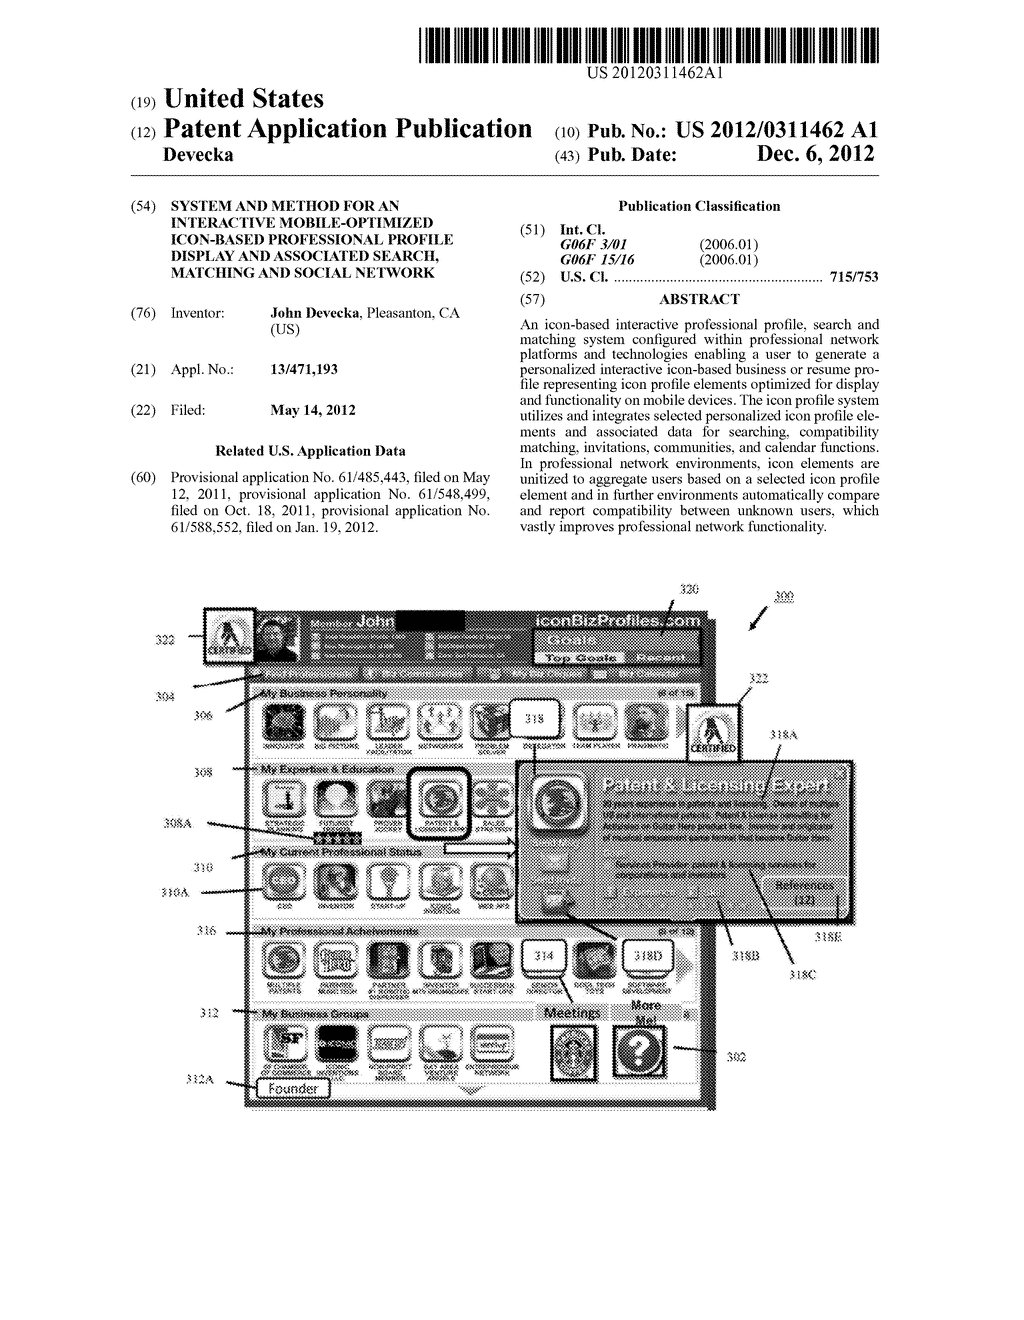 SYSTEM AND METHOD FOR AN INTERACTIVE MOBILE-OPTIMIZED ICON-BASED     PROFESSIONAL PROFILE DISPLAY AND ASSOCIATED SEARCH, MATCHING AND SOCIAL     NETWORK - diagram, schematic, and image 01